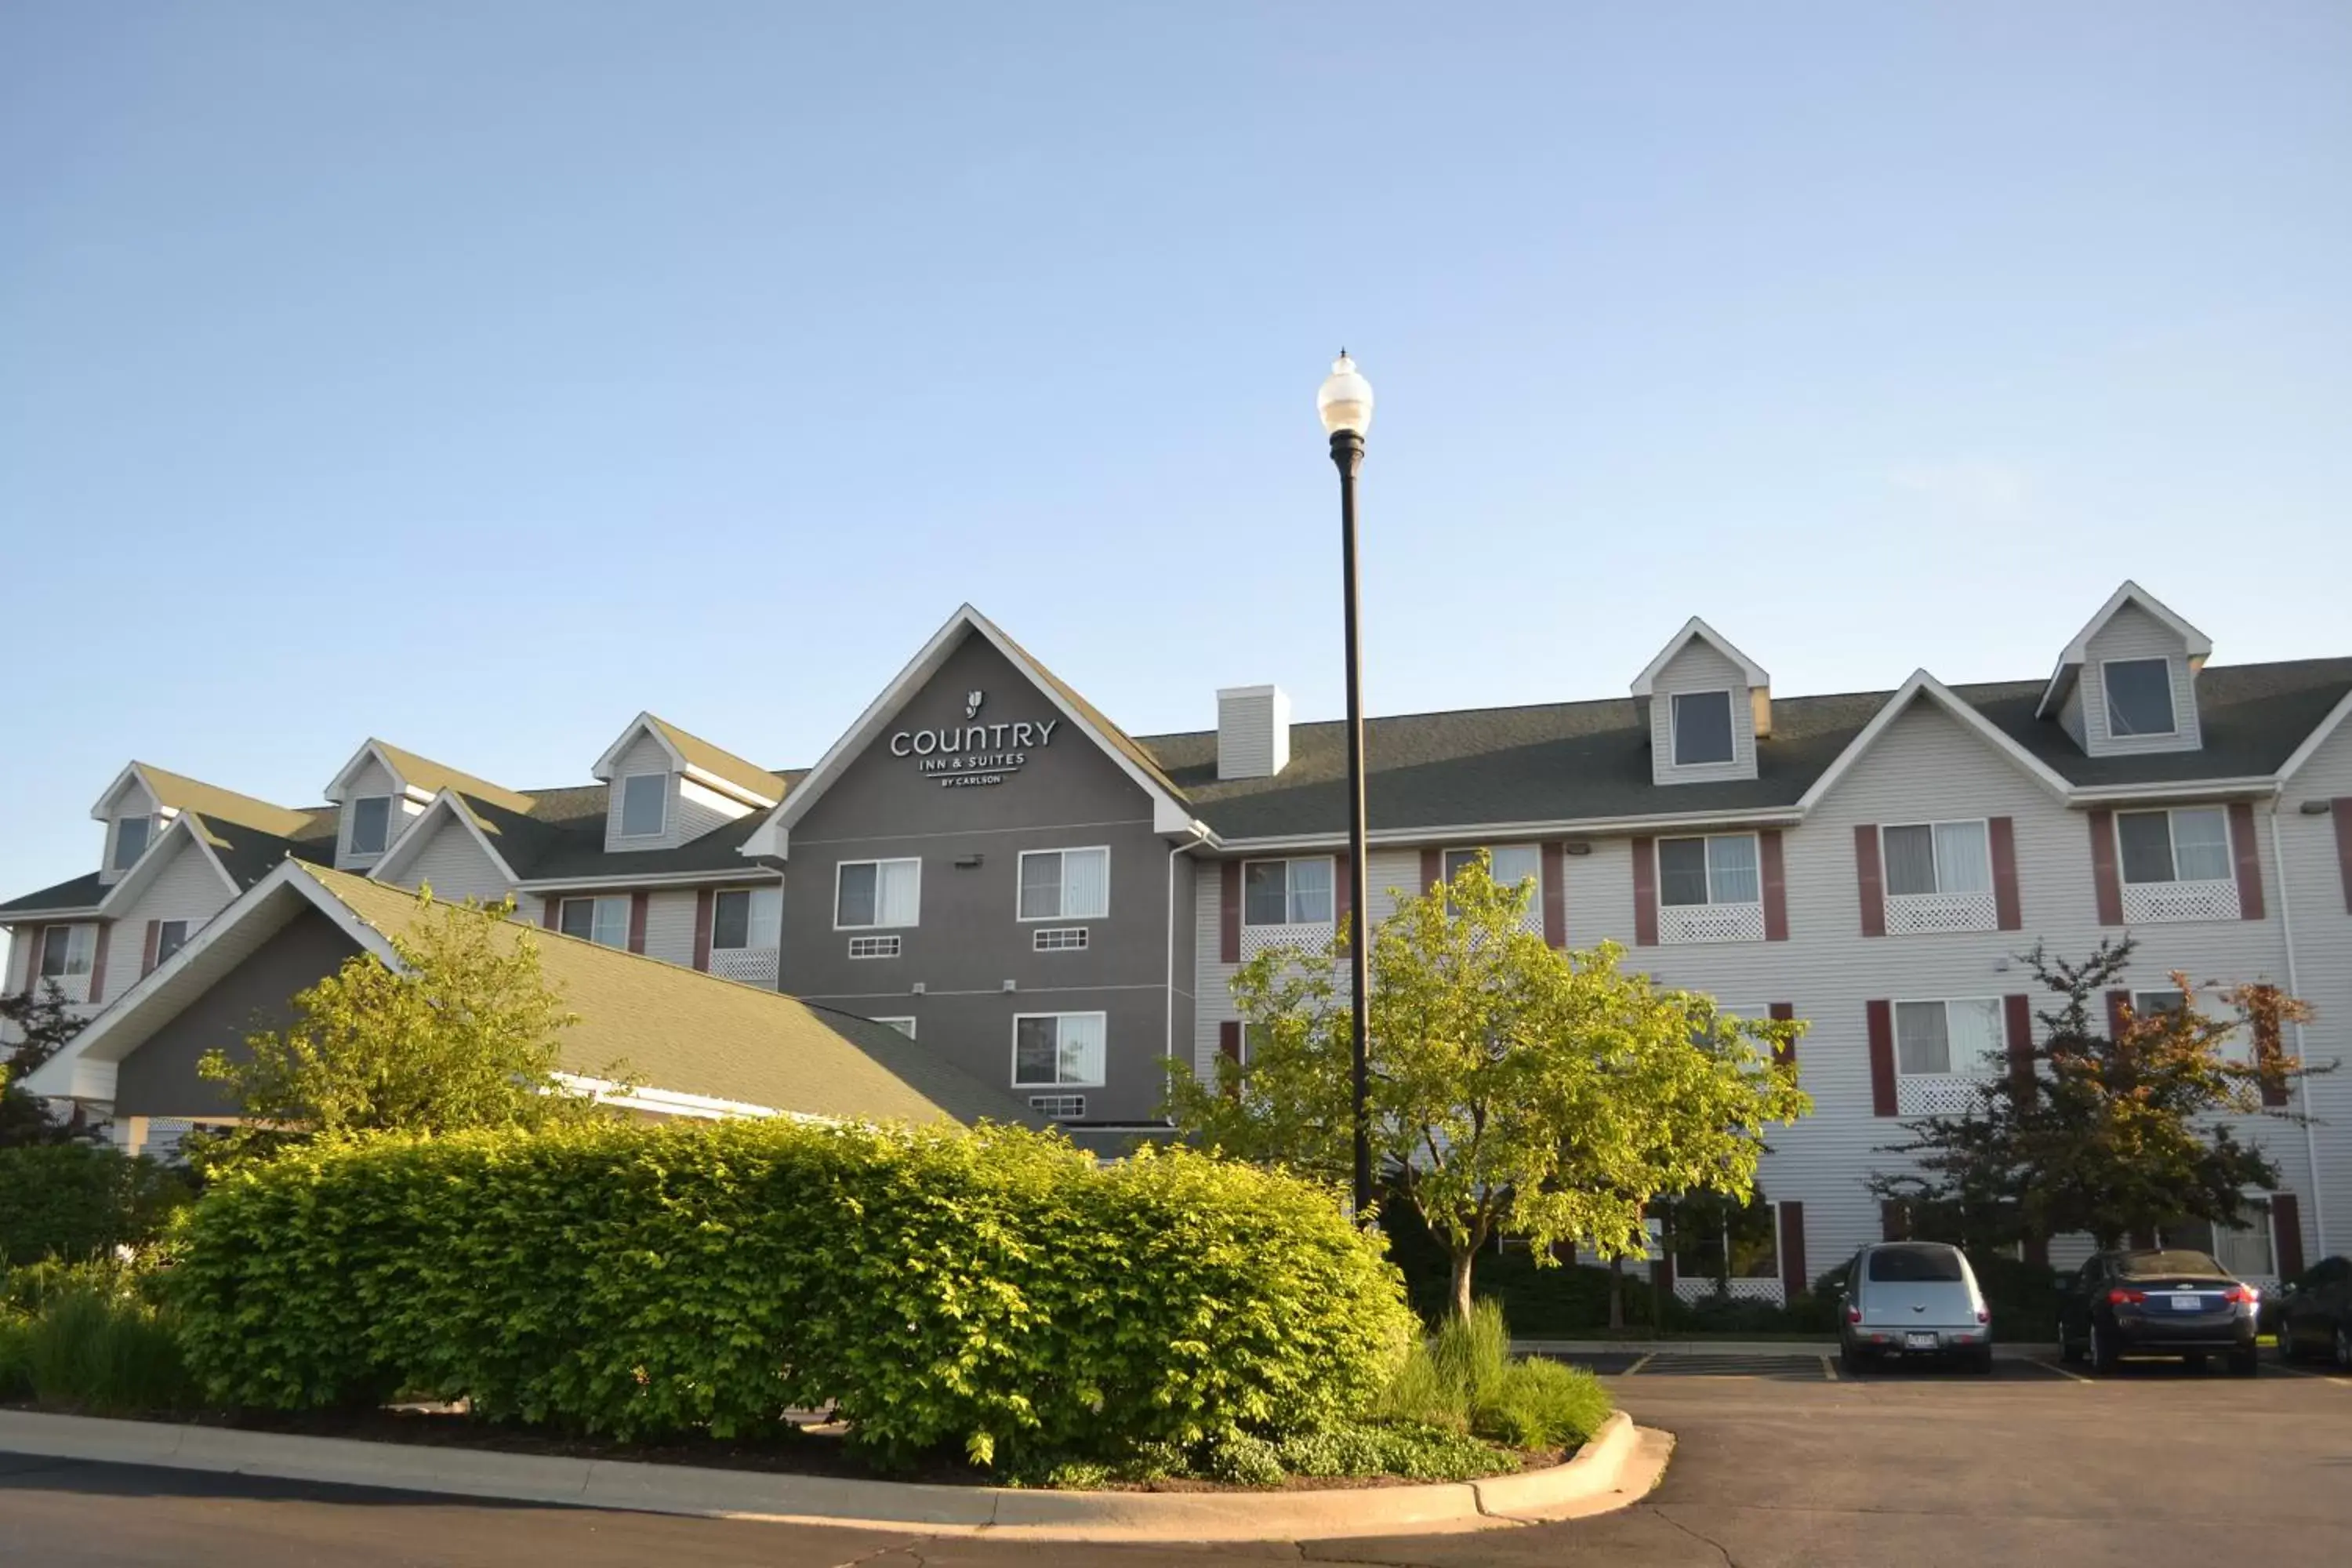 Property Building in Country Inn & Suites by Radisson, Gurnee, IL